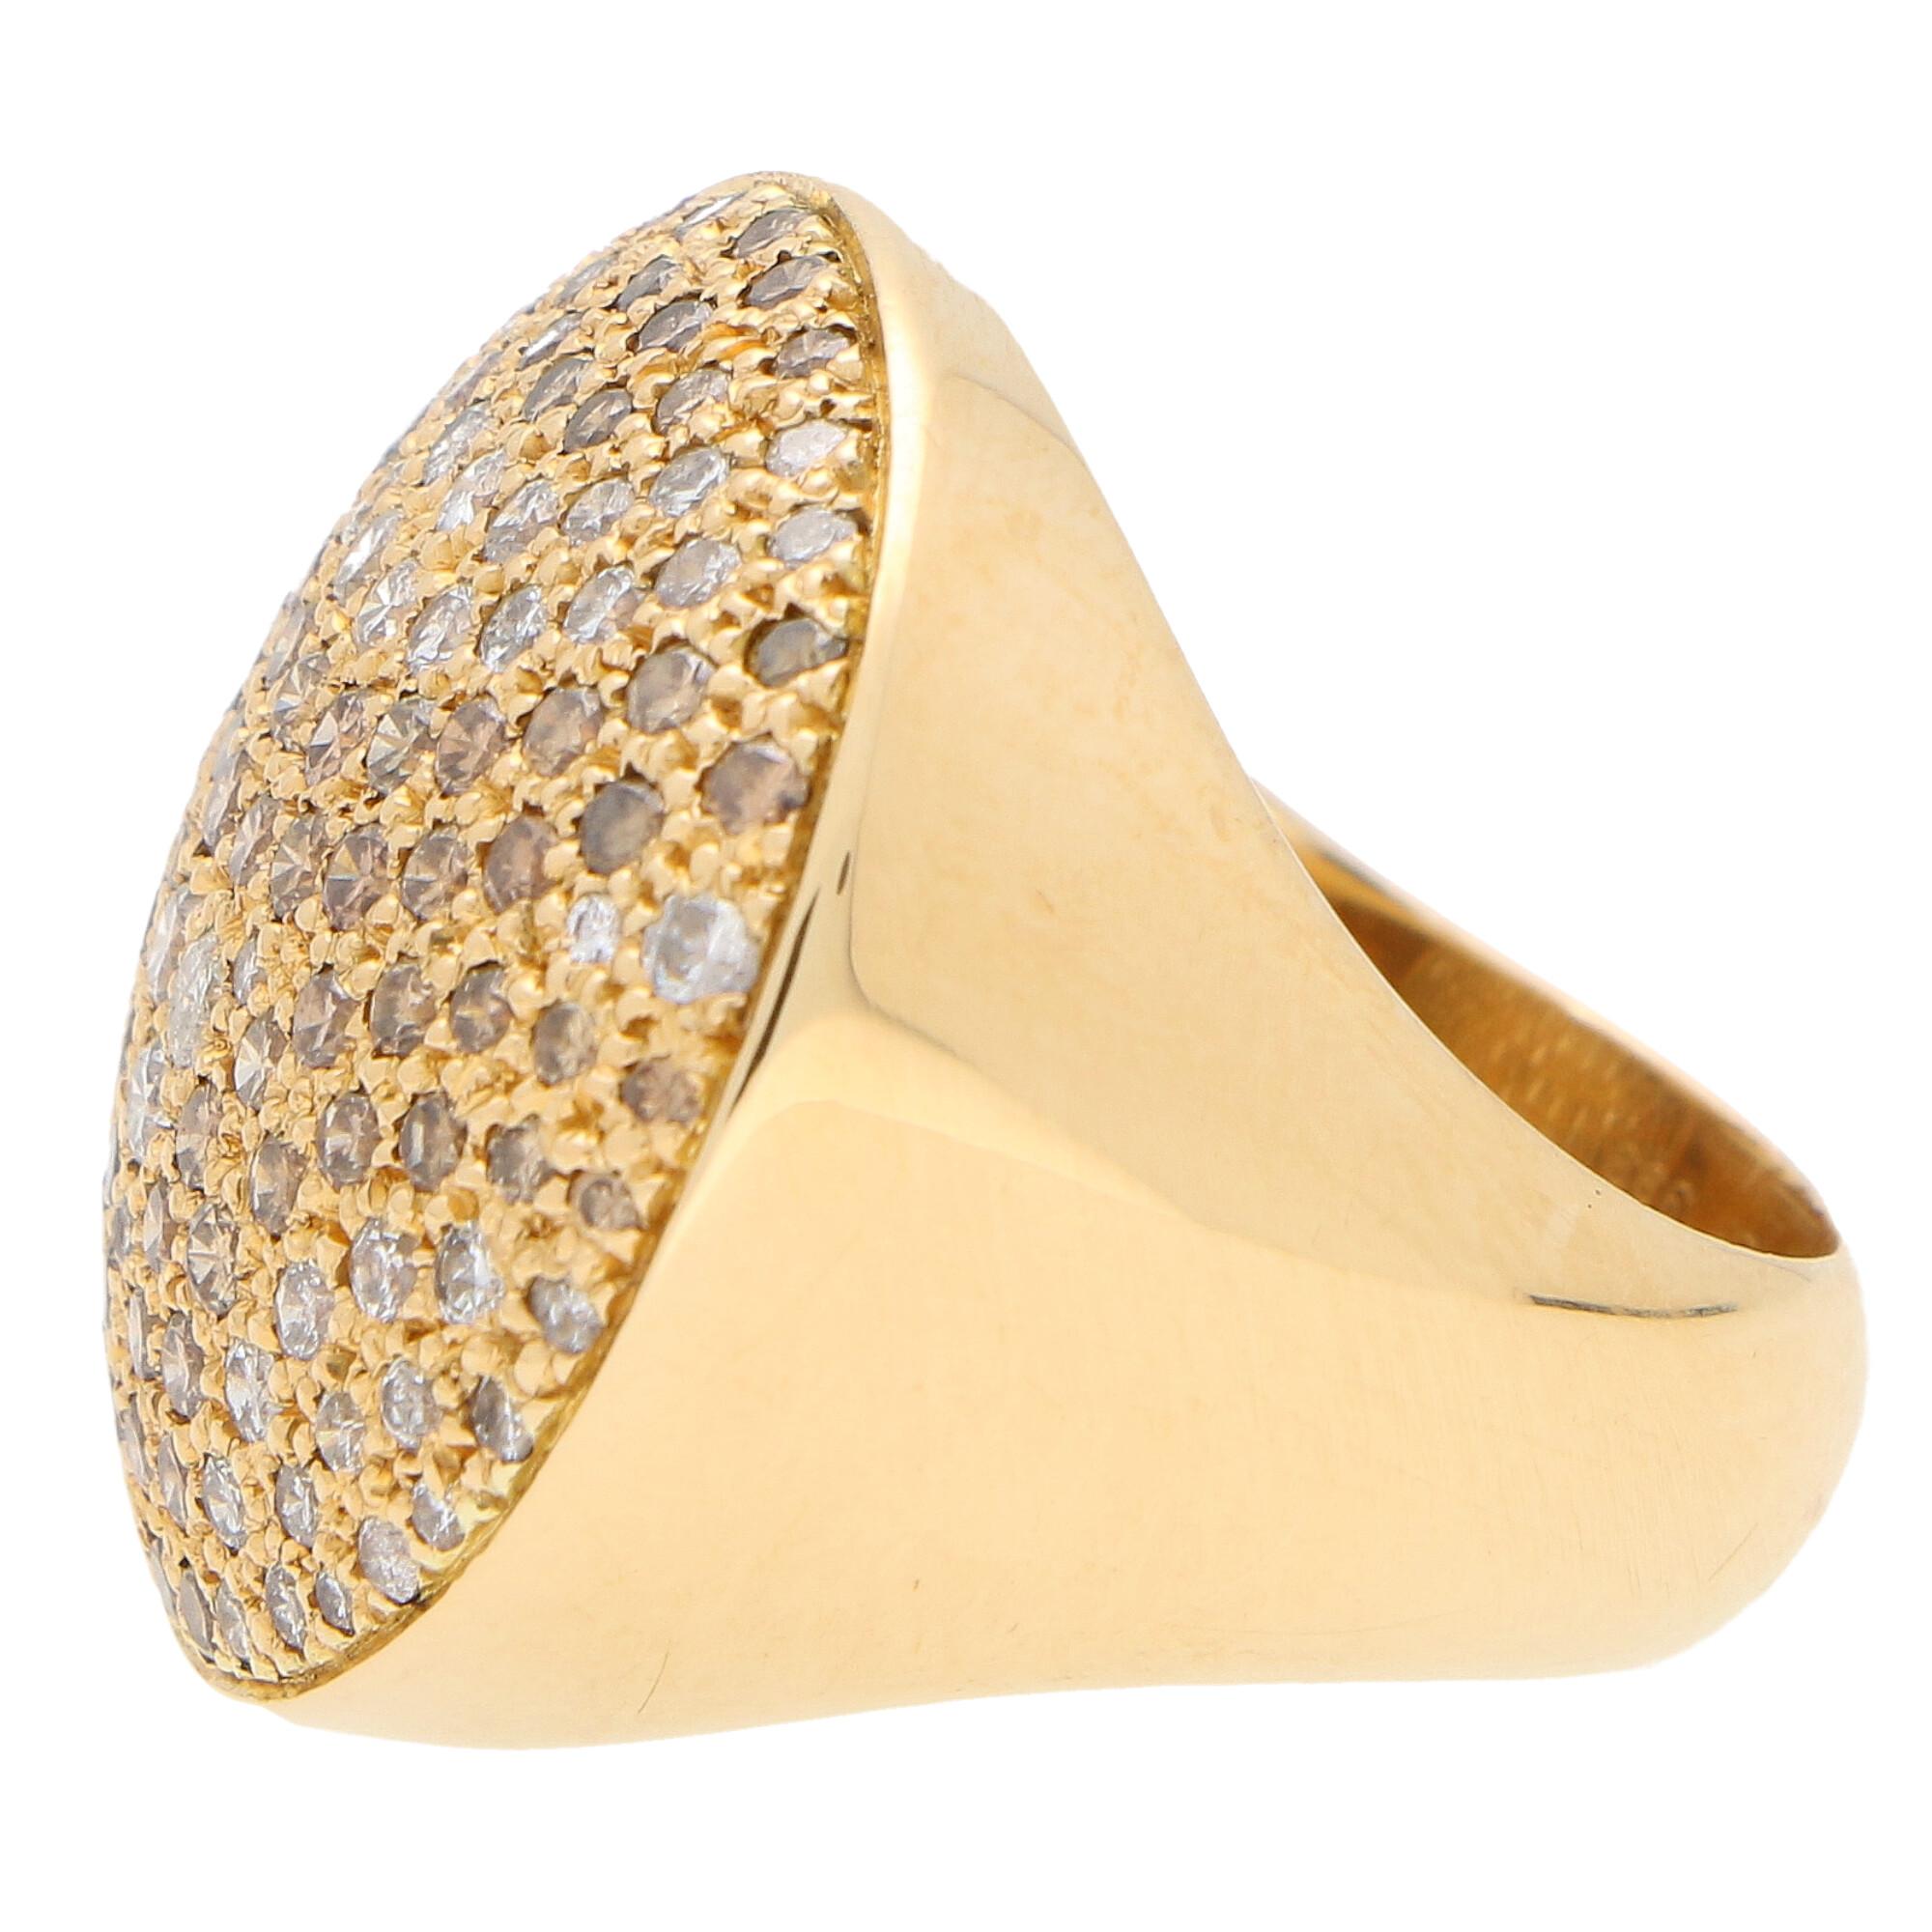 Round Cut Vintage Cartier Jeton Sauvage White and Cognac Diamond Cocktail Ring in 18k Gold